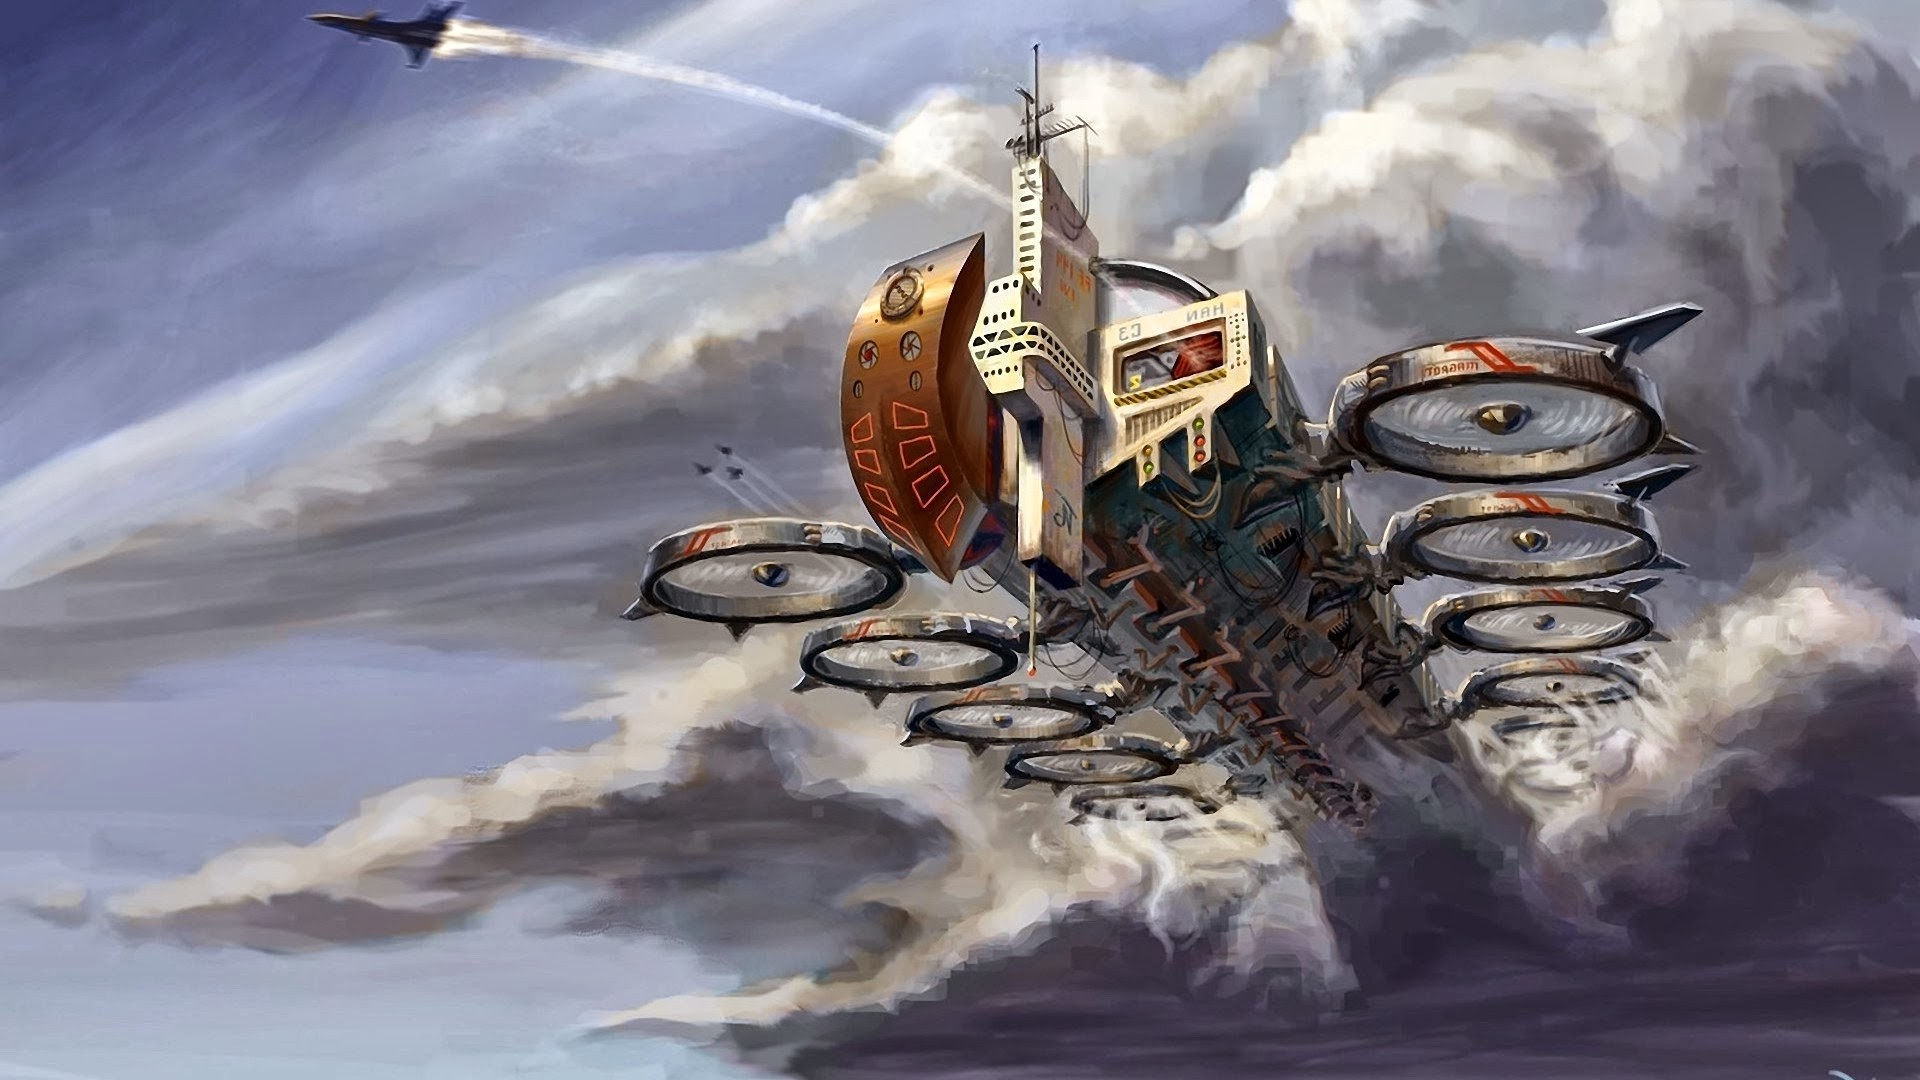 General 1920x1080 artwork sky hovercraft army science fiction vehicle aircraft futuristic